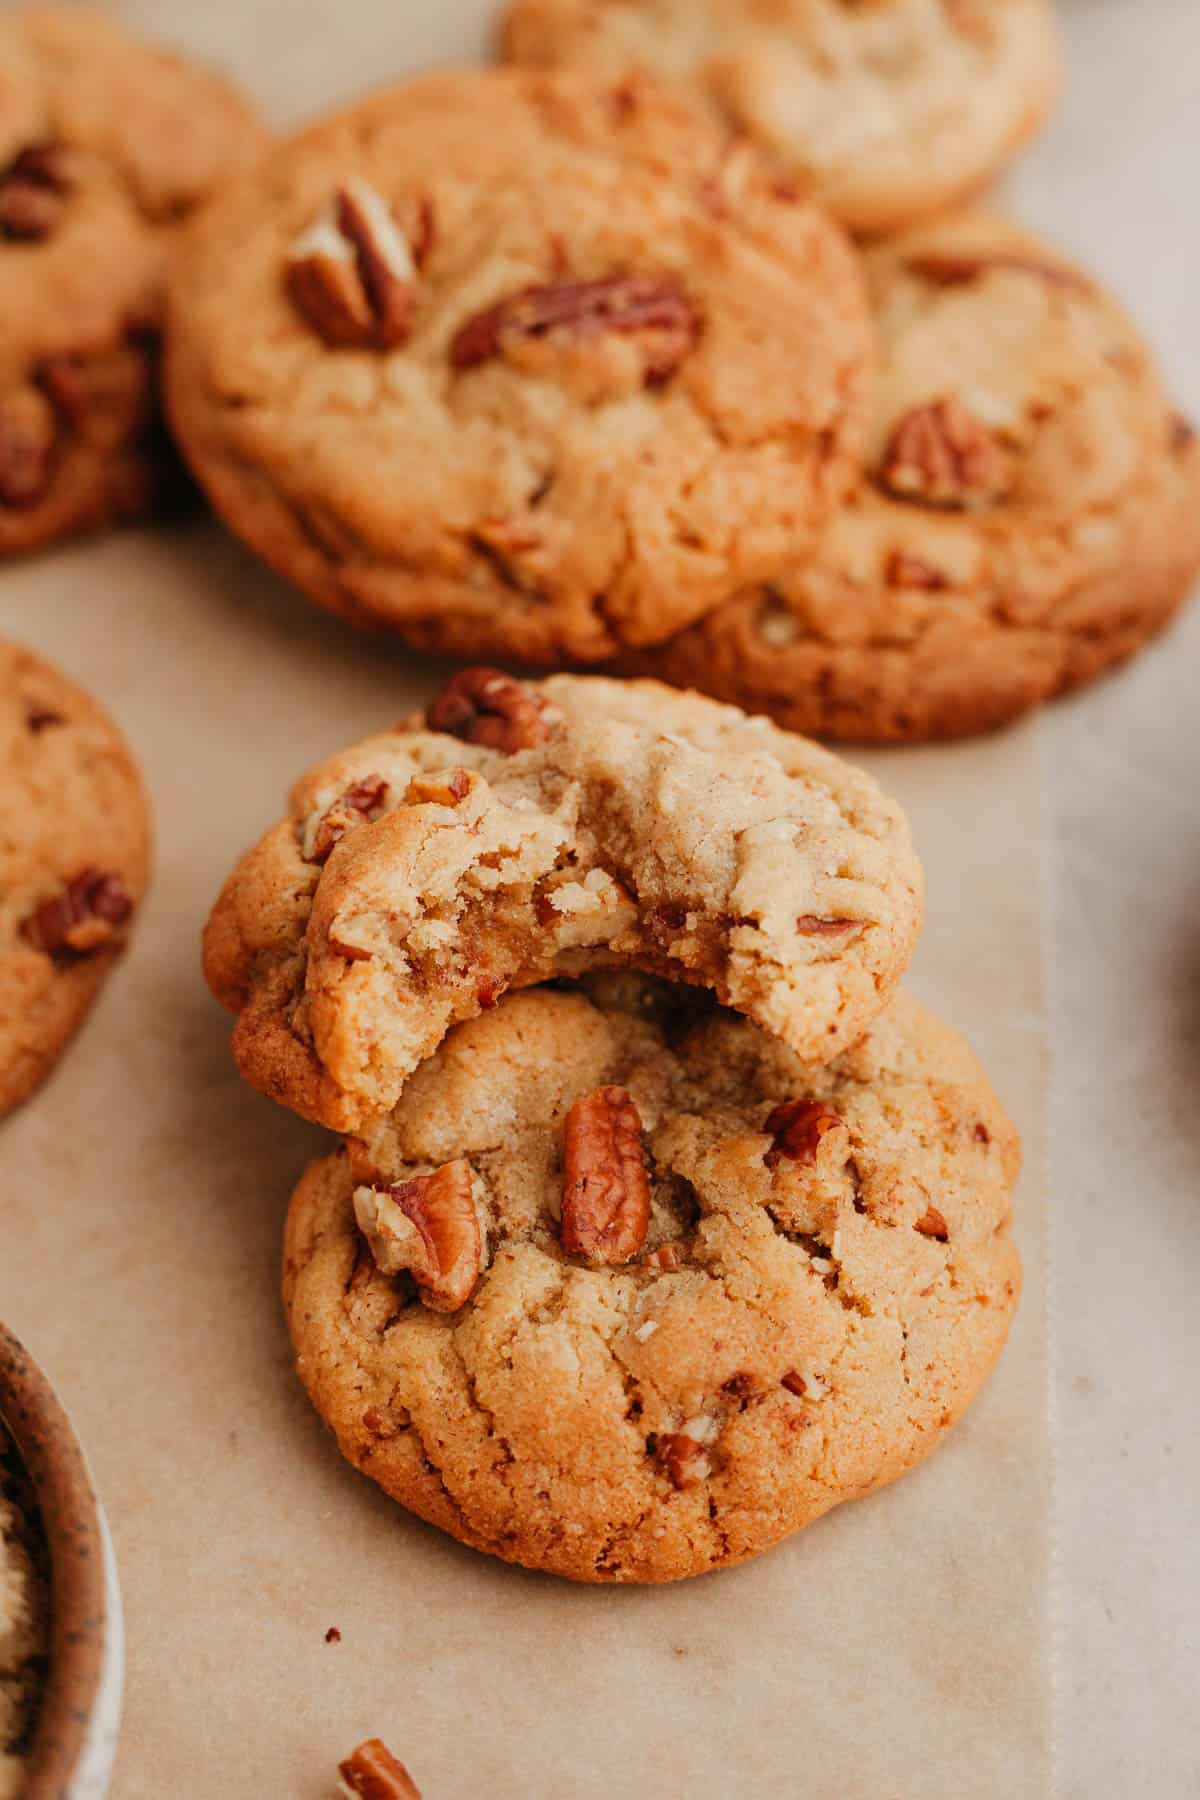 Two pecan cookies on top of each other, one has a bite taken out of it.